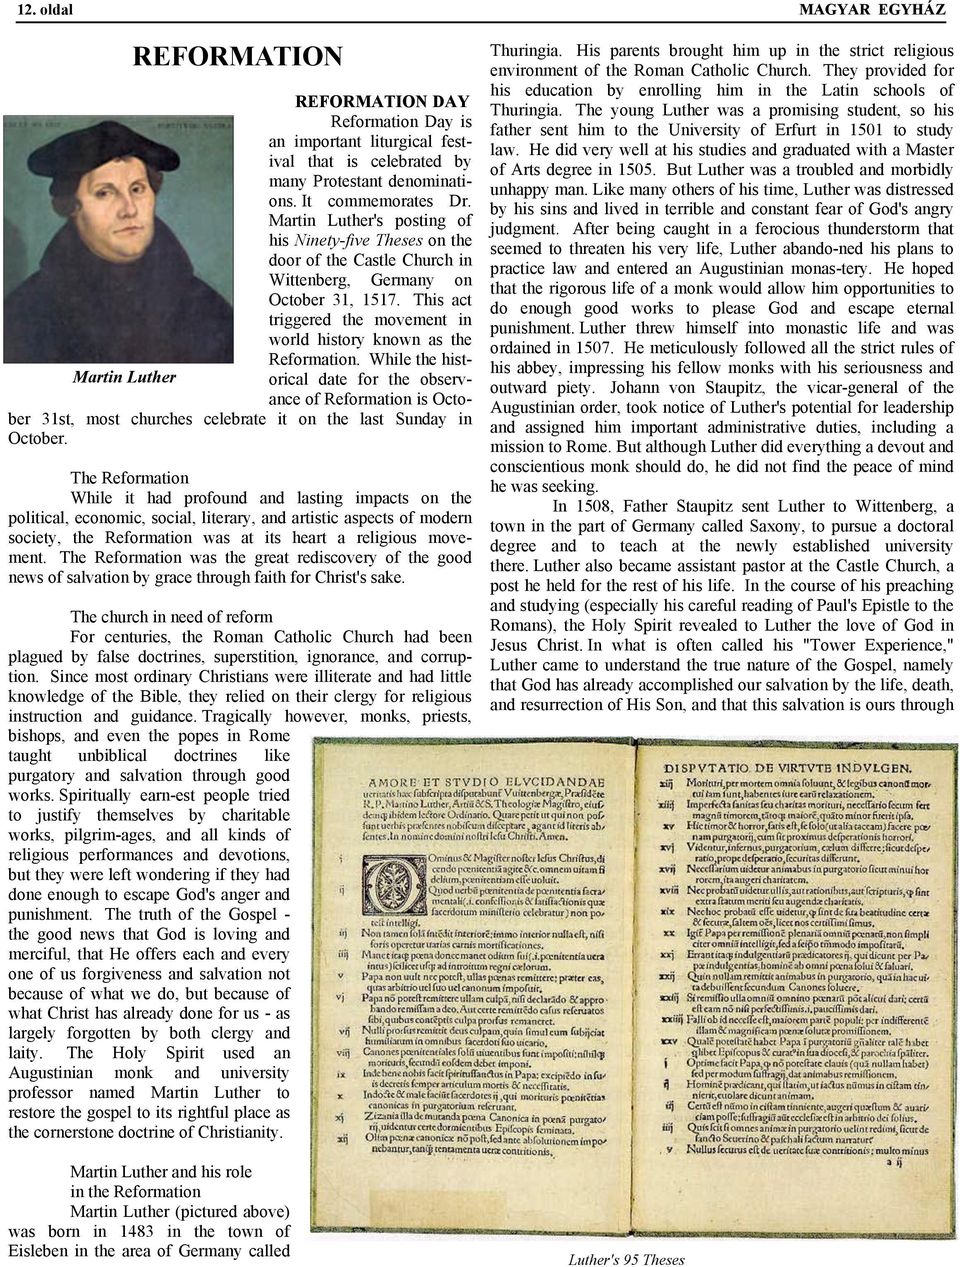 In 1517, Luther (now a Doctor of Theology and a respected professor) was drawn into a controversy over the sale of indulgences.